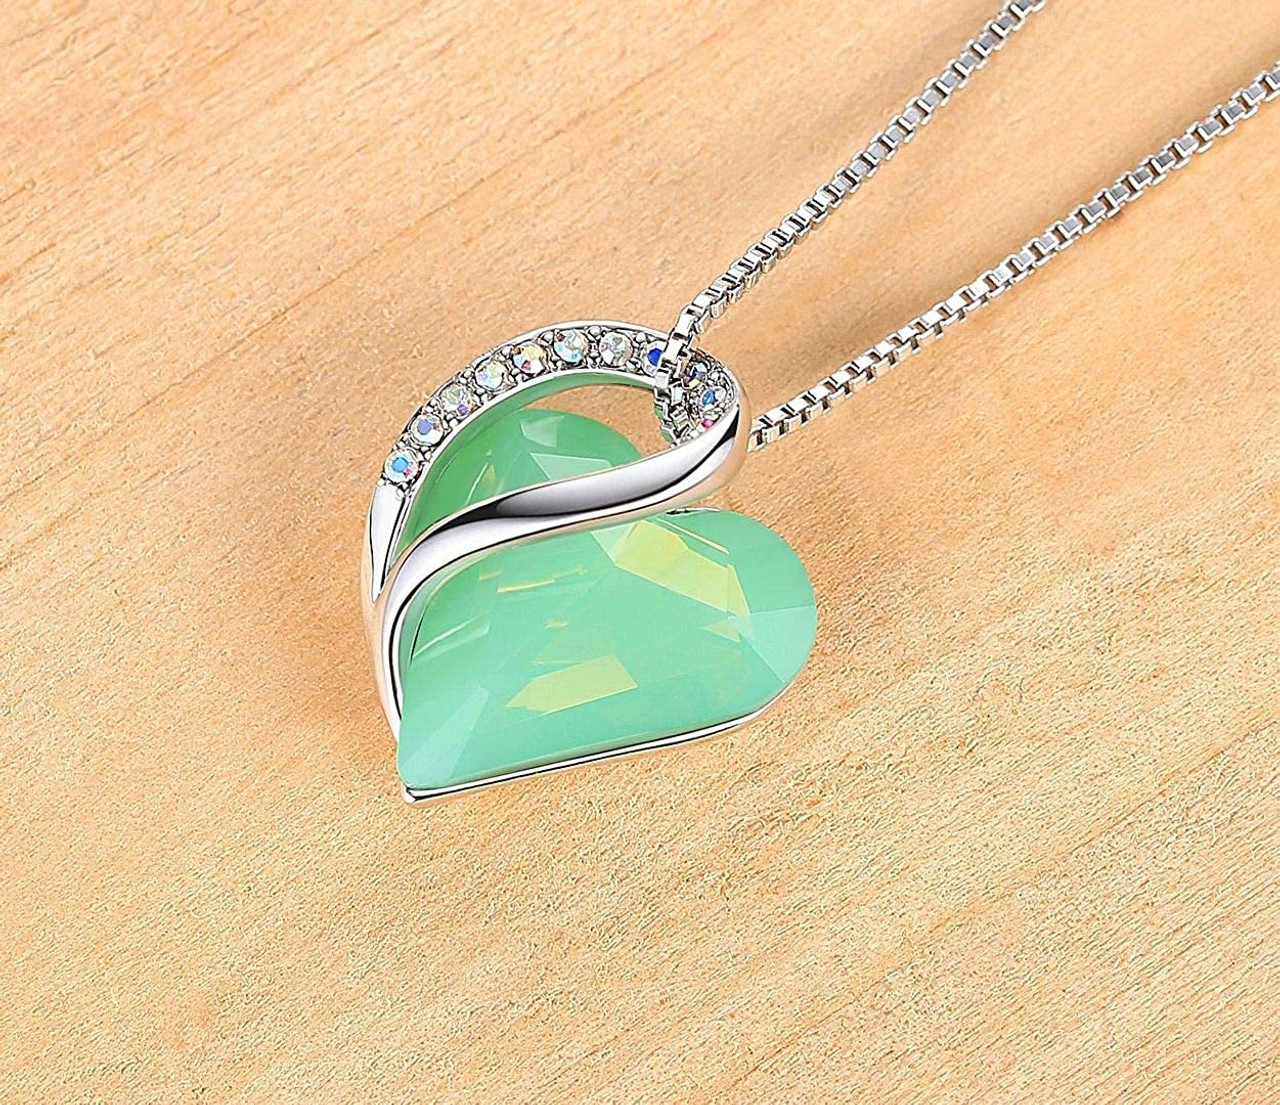  Jade Green Heart Crystal (Silver Tone) Pendant with 18" Chain Necklace - Gift for Her - Heart Pendant for Women. Color: Good Luck / Lucky Crystal